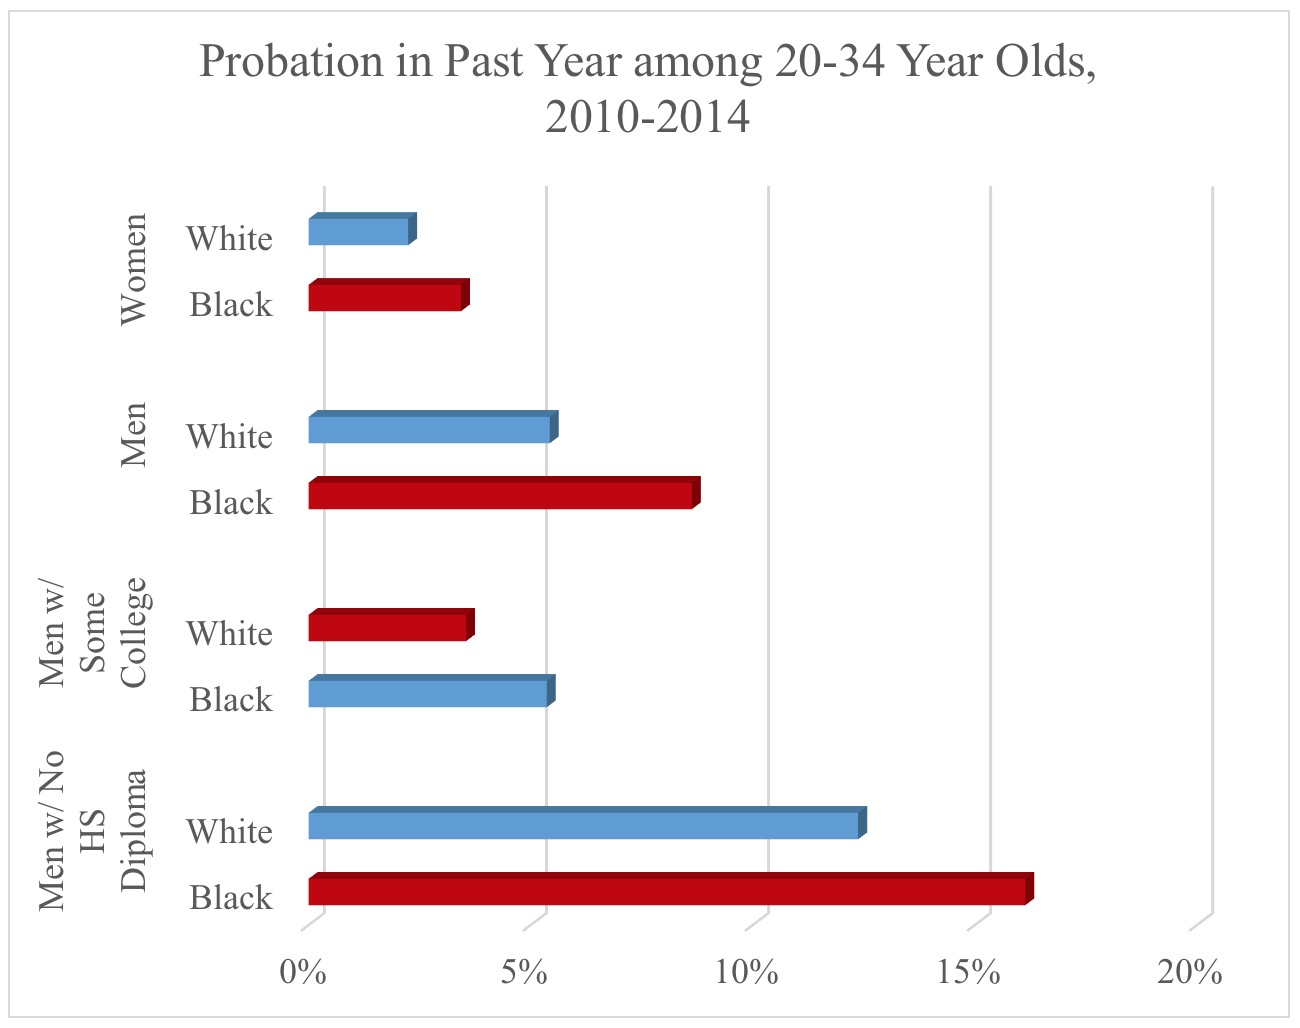 Probation in Past Year among 20-34 Year Olds, 2010-2014